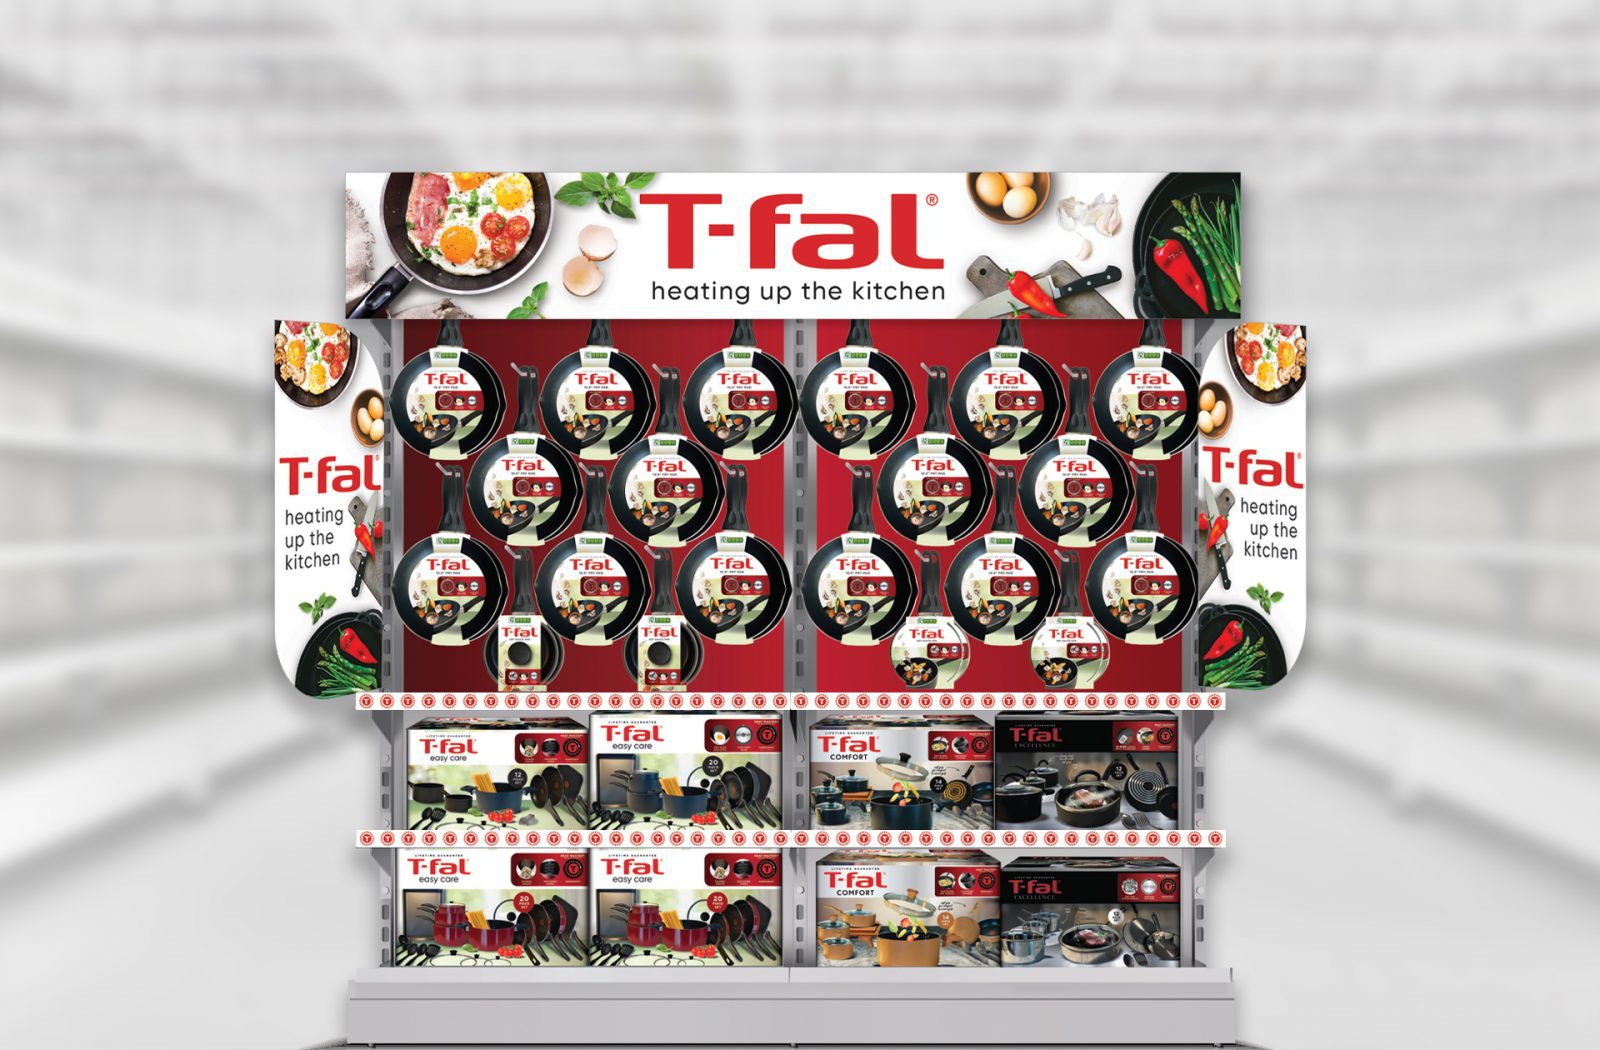 Render of a retail in store display for T-fal, showcasing brand world and identity design services for consumer packaged goods.